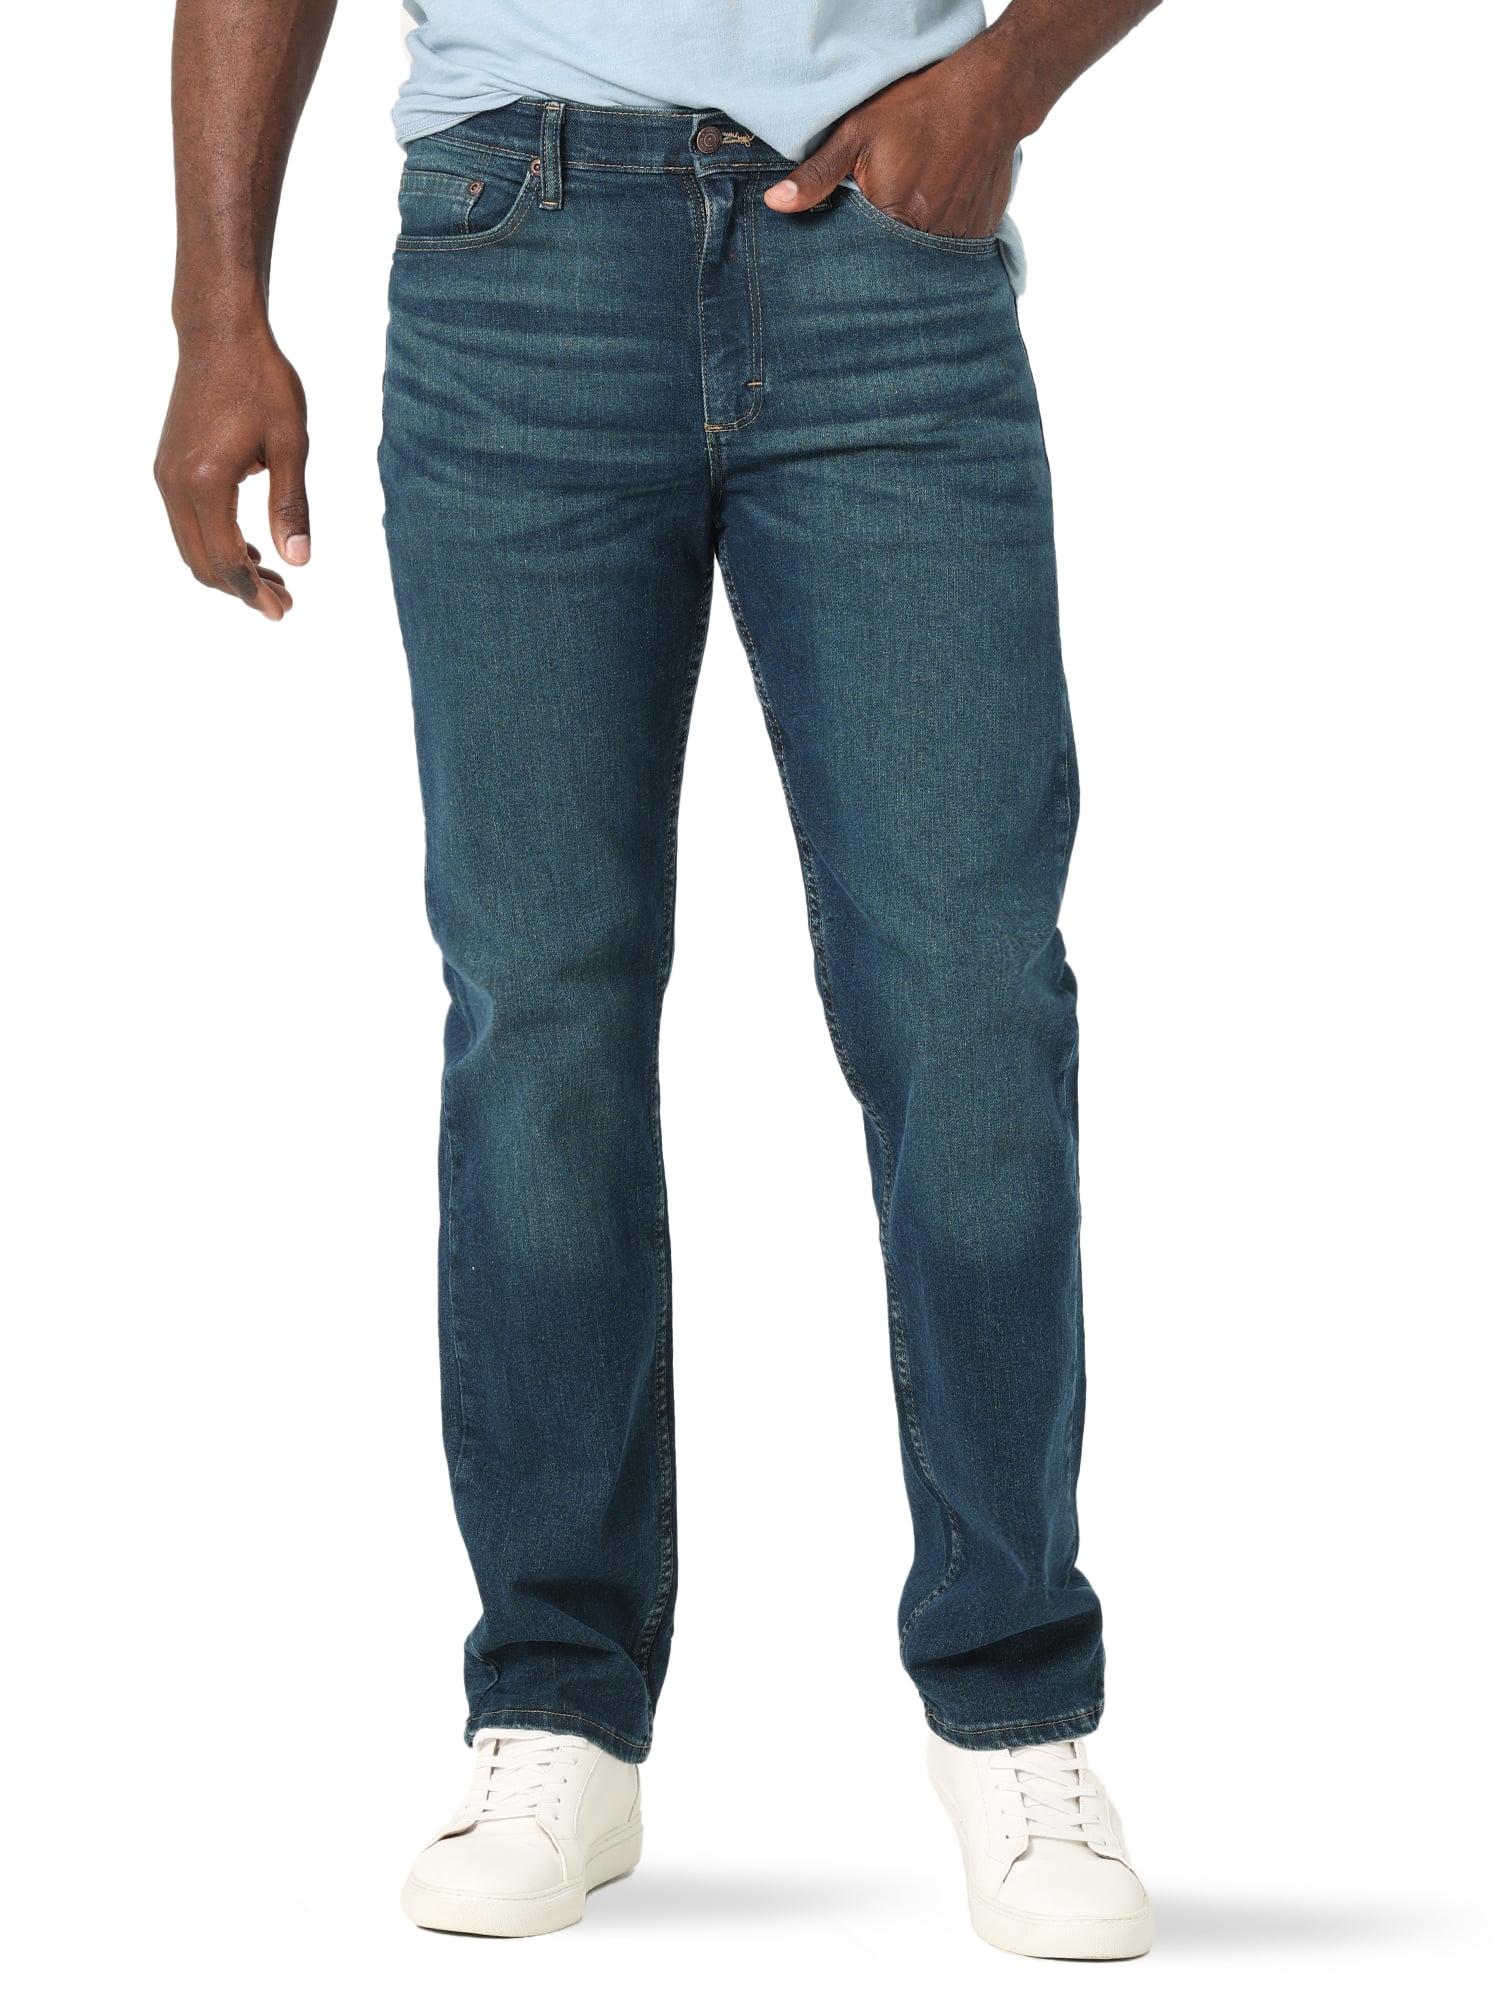 Wrangler Men's Performance Series Relaxed Fit Jean with Weather ...